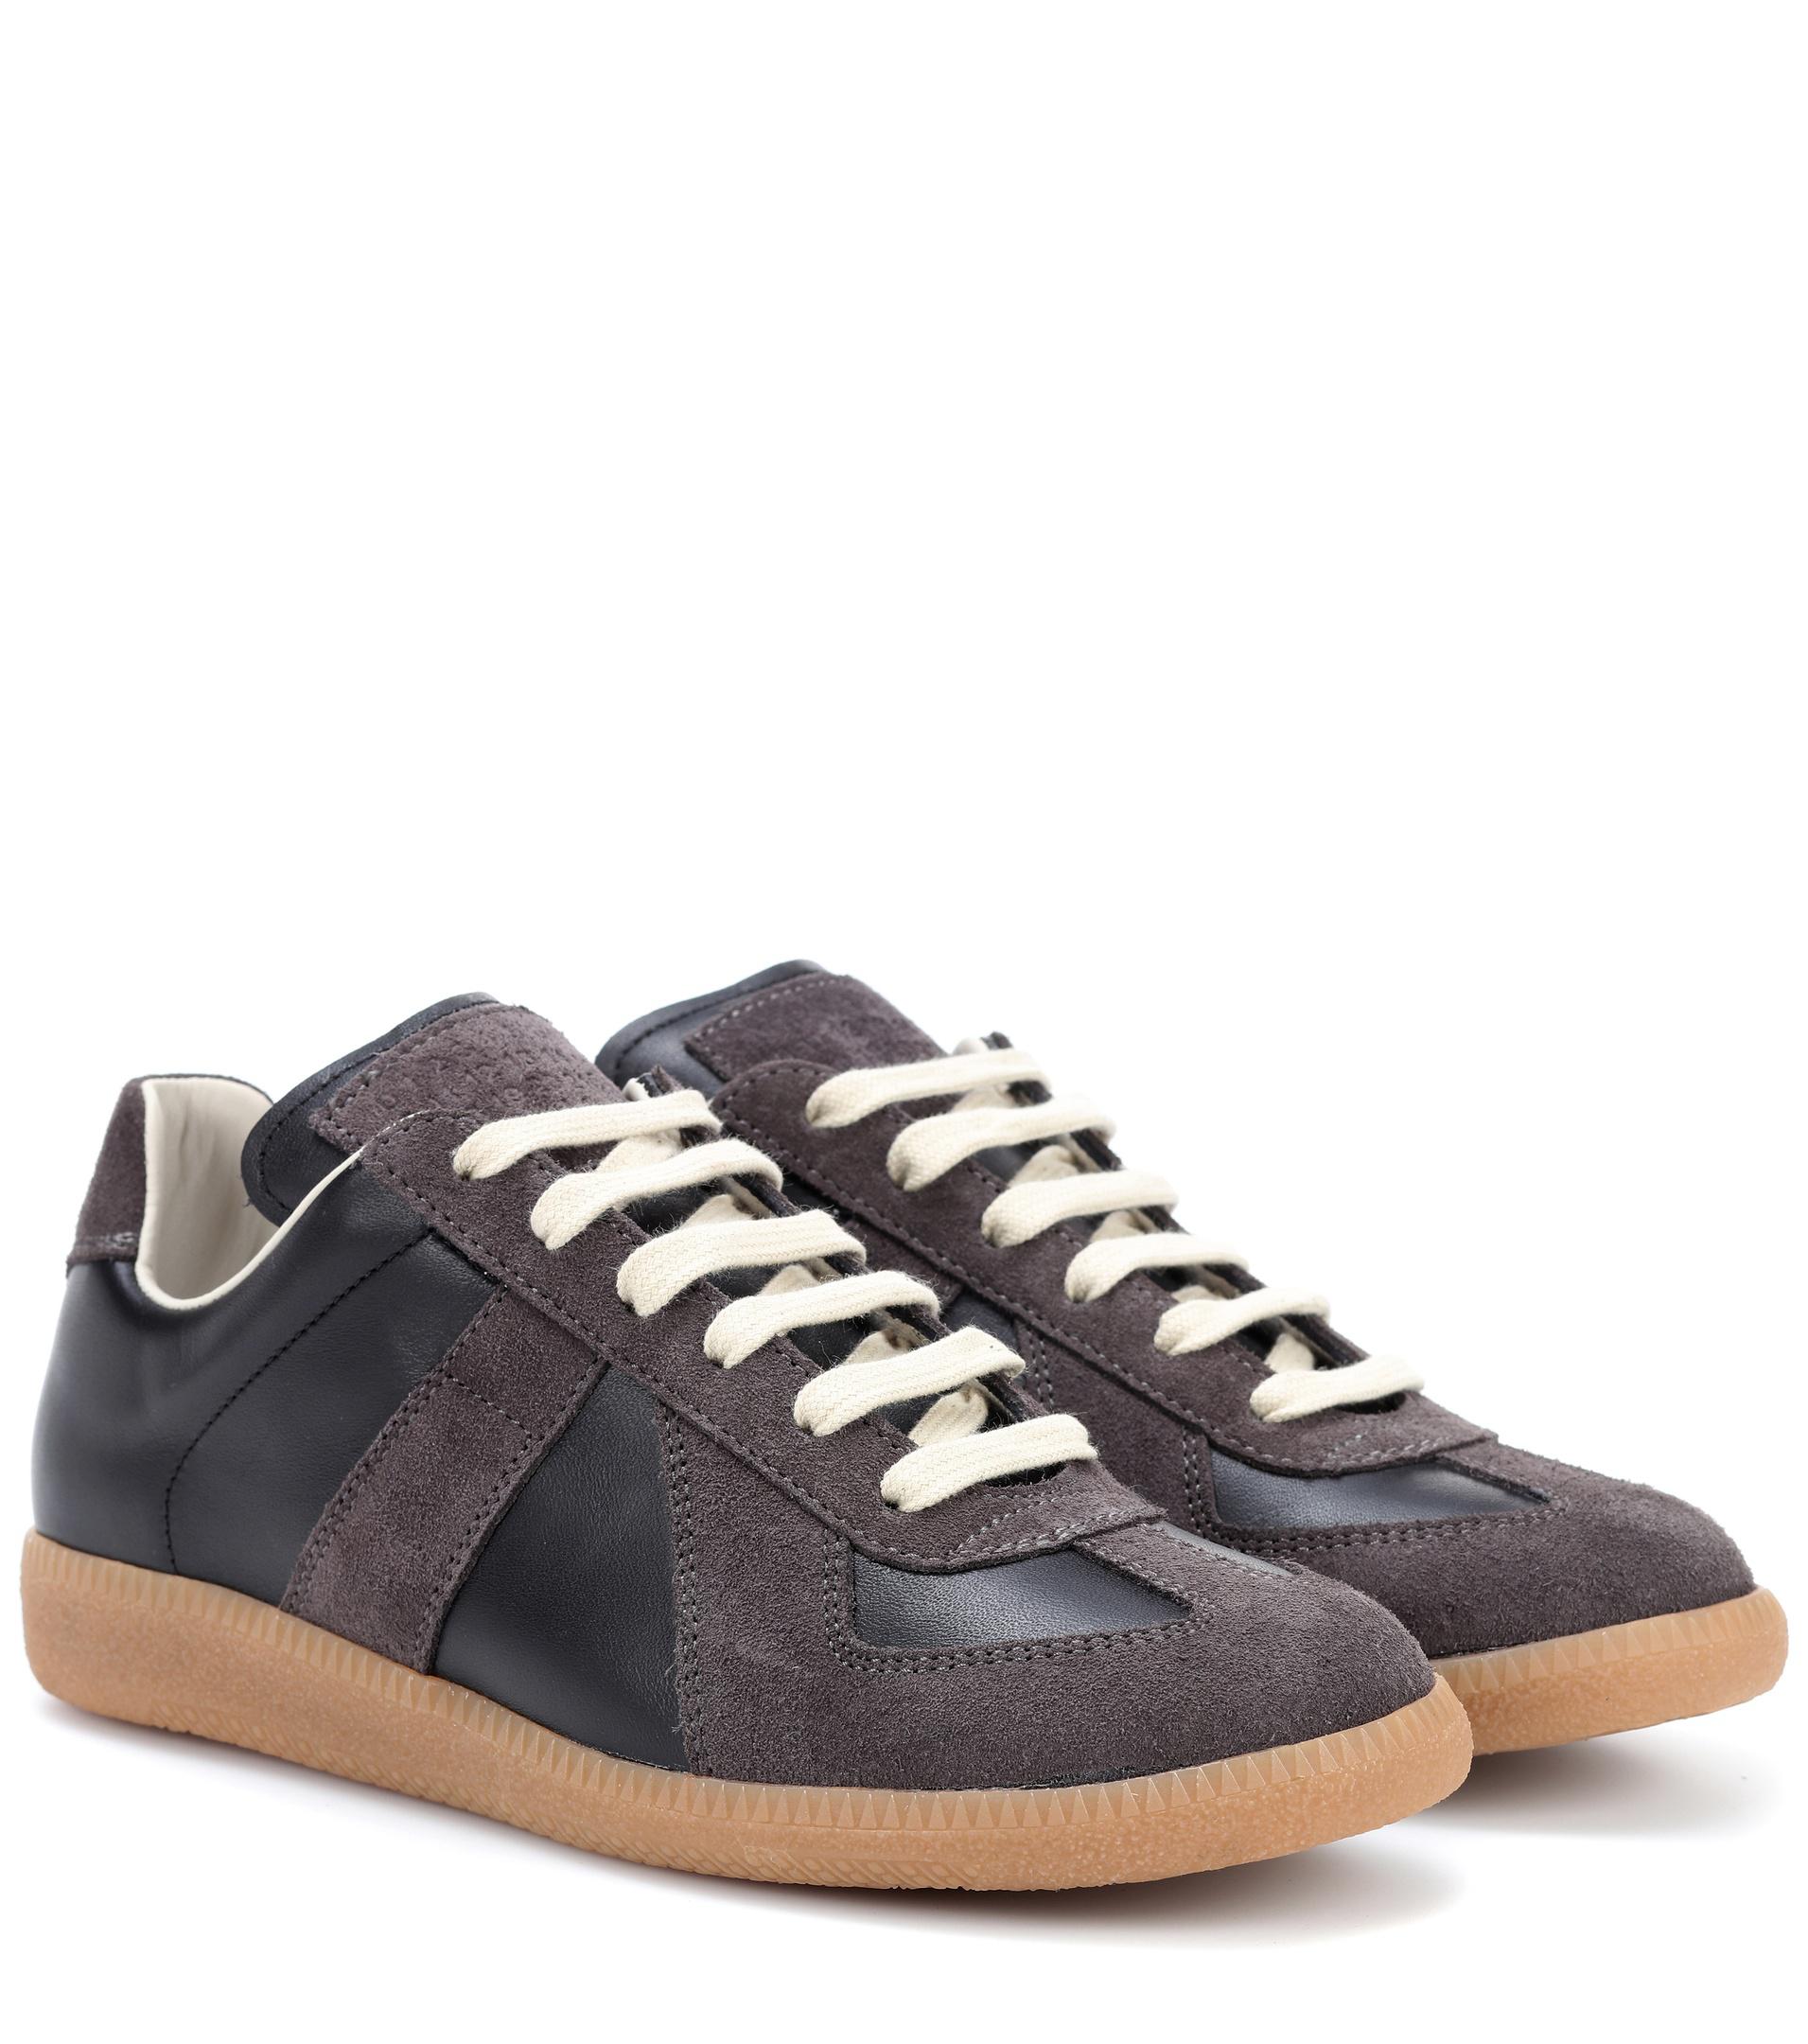 Maison Margiela Replica Leather And Suede Sneakers in Brown - Lyst